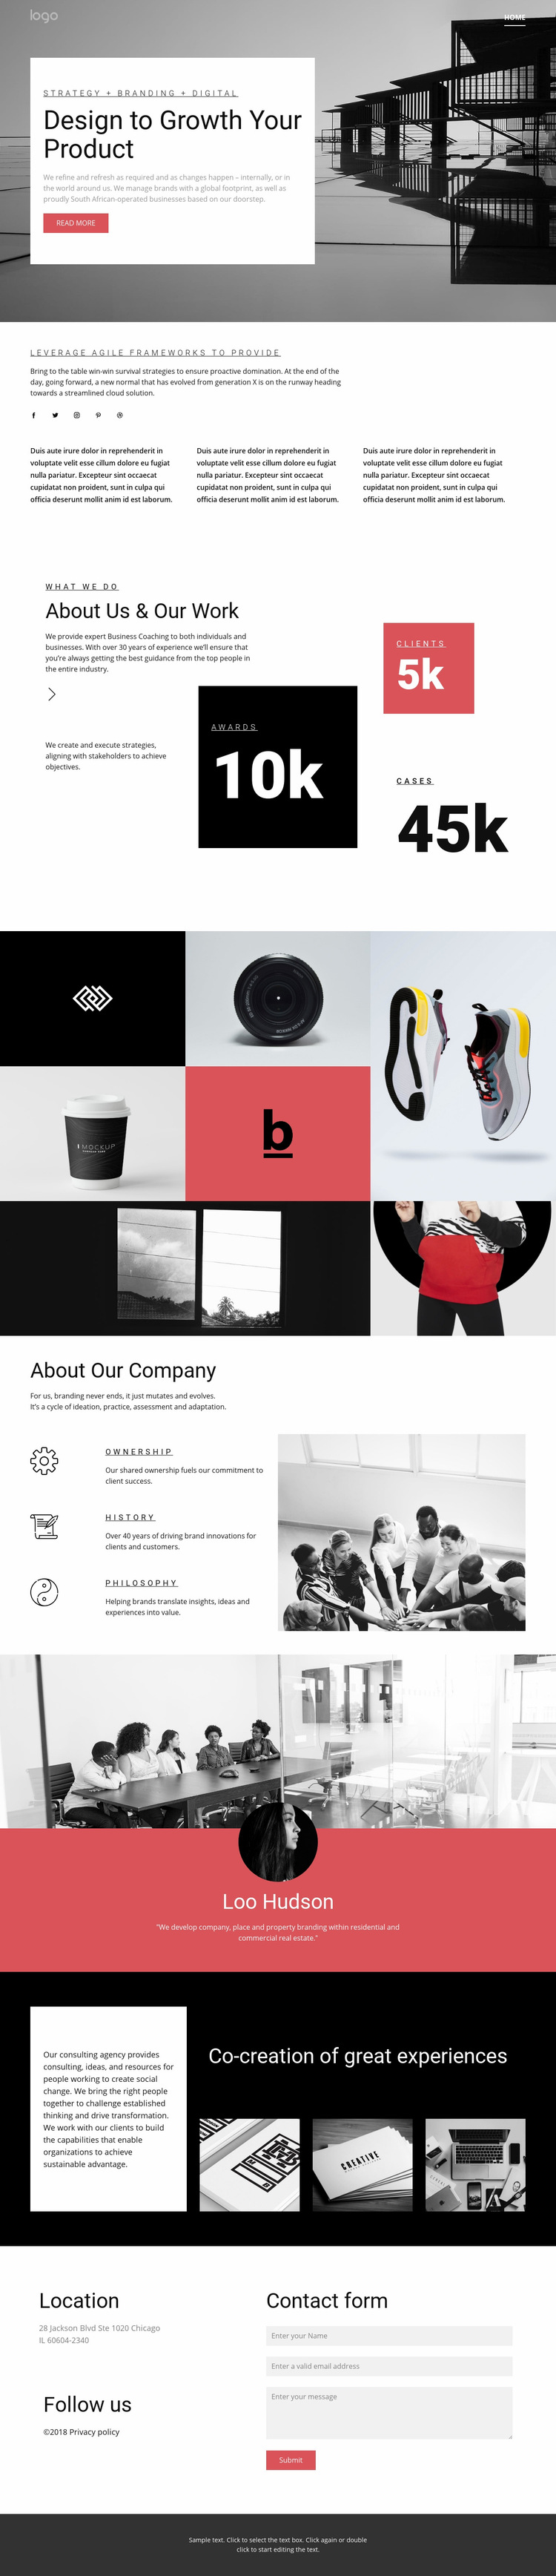 Business growth agency Web Page Design